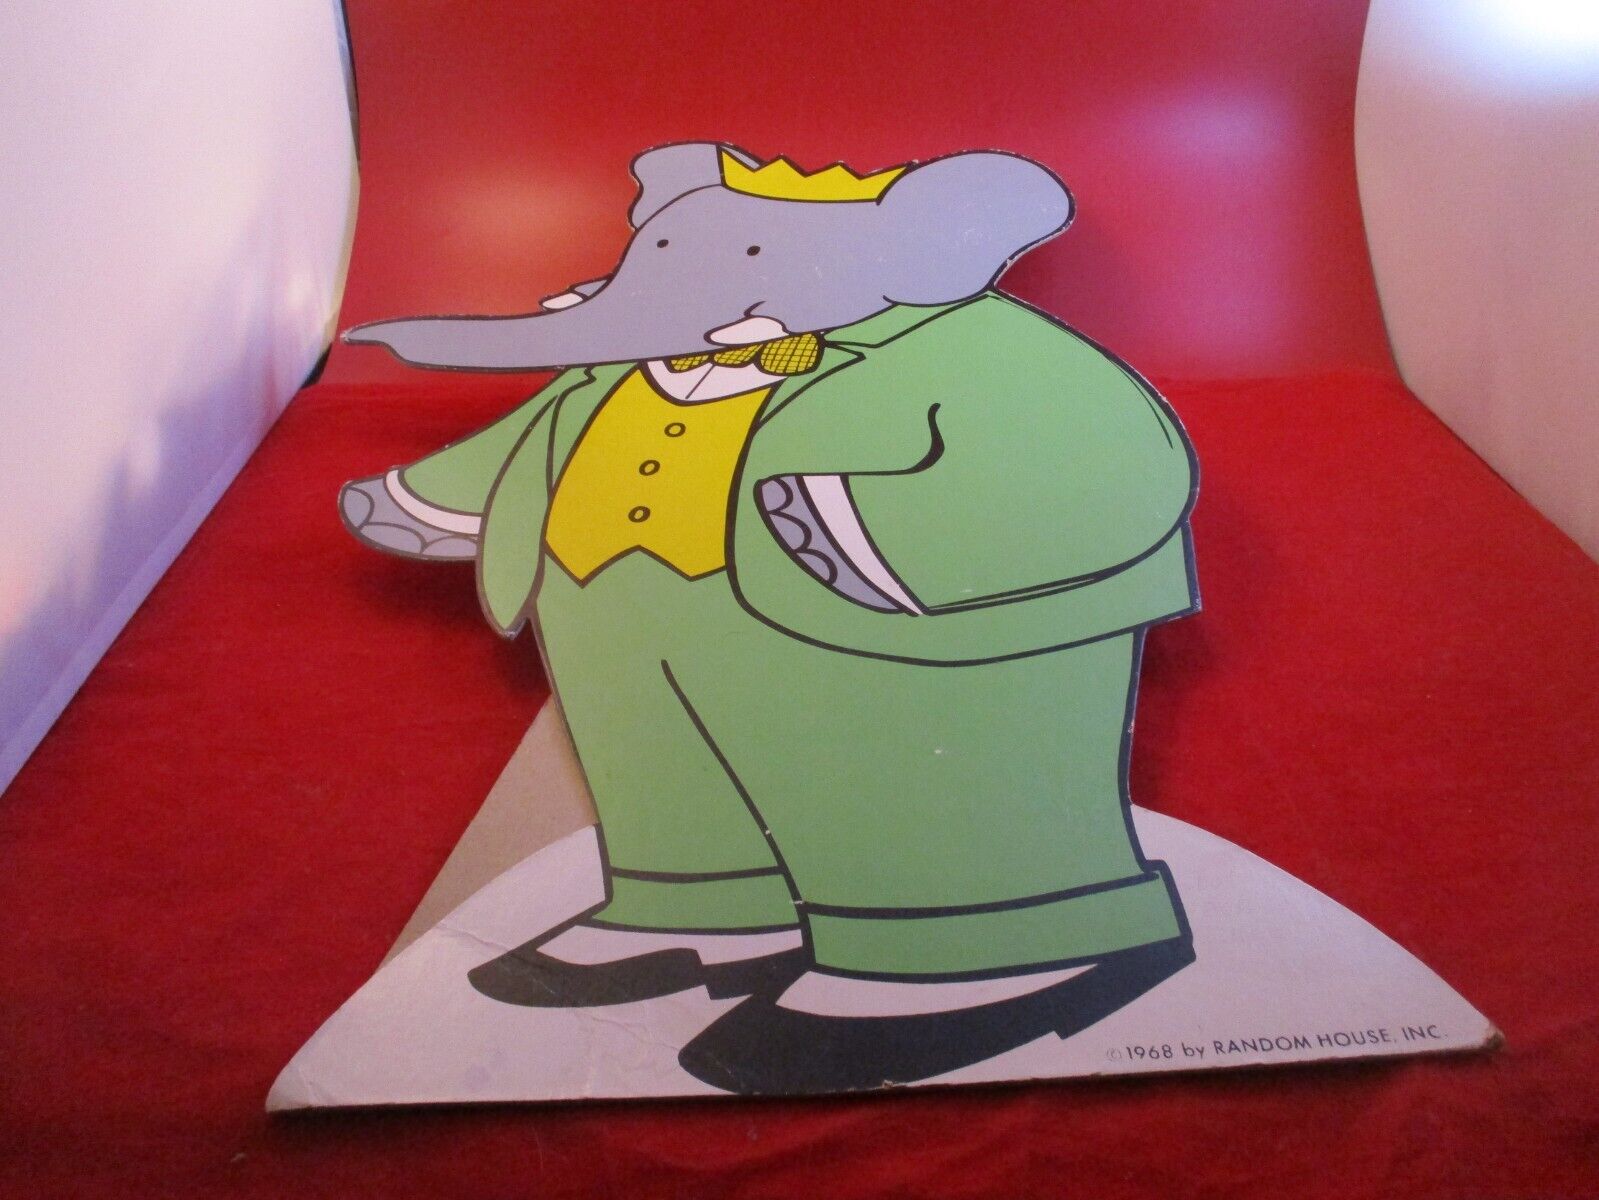 Babar the Elephant 1968 Random House Promotional Store Counter Standee Display